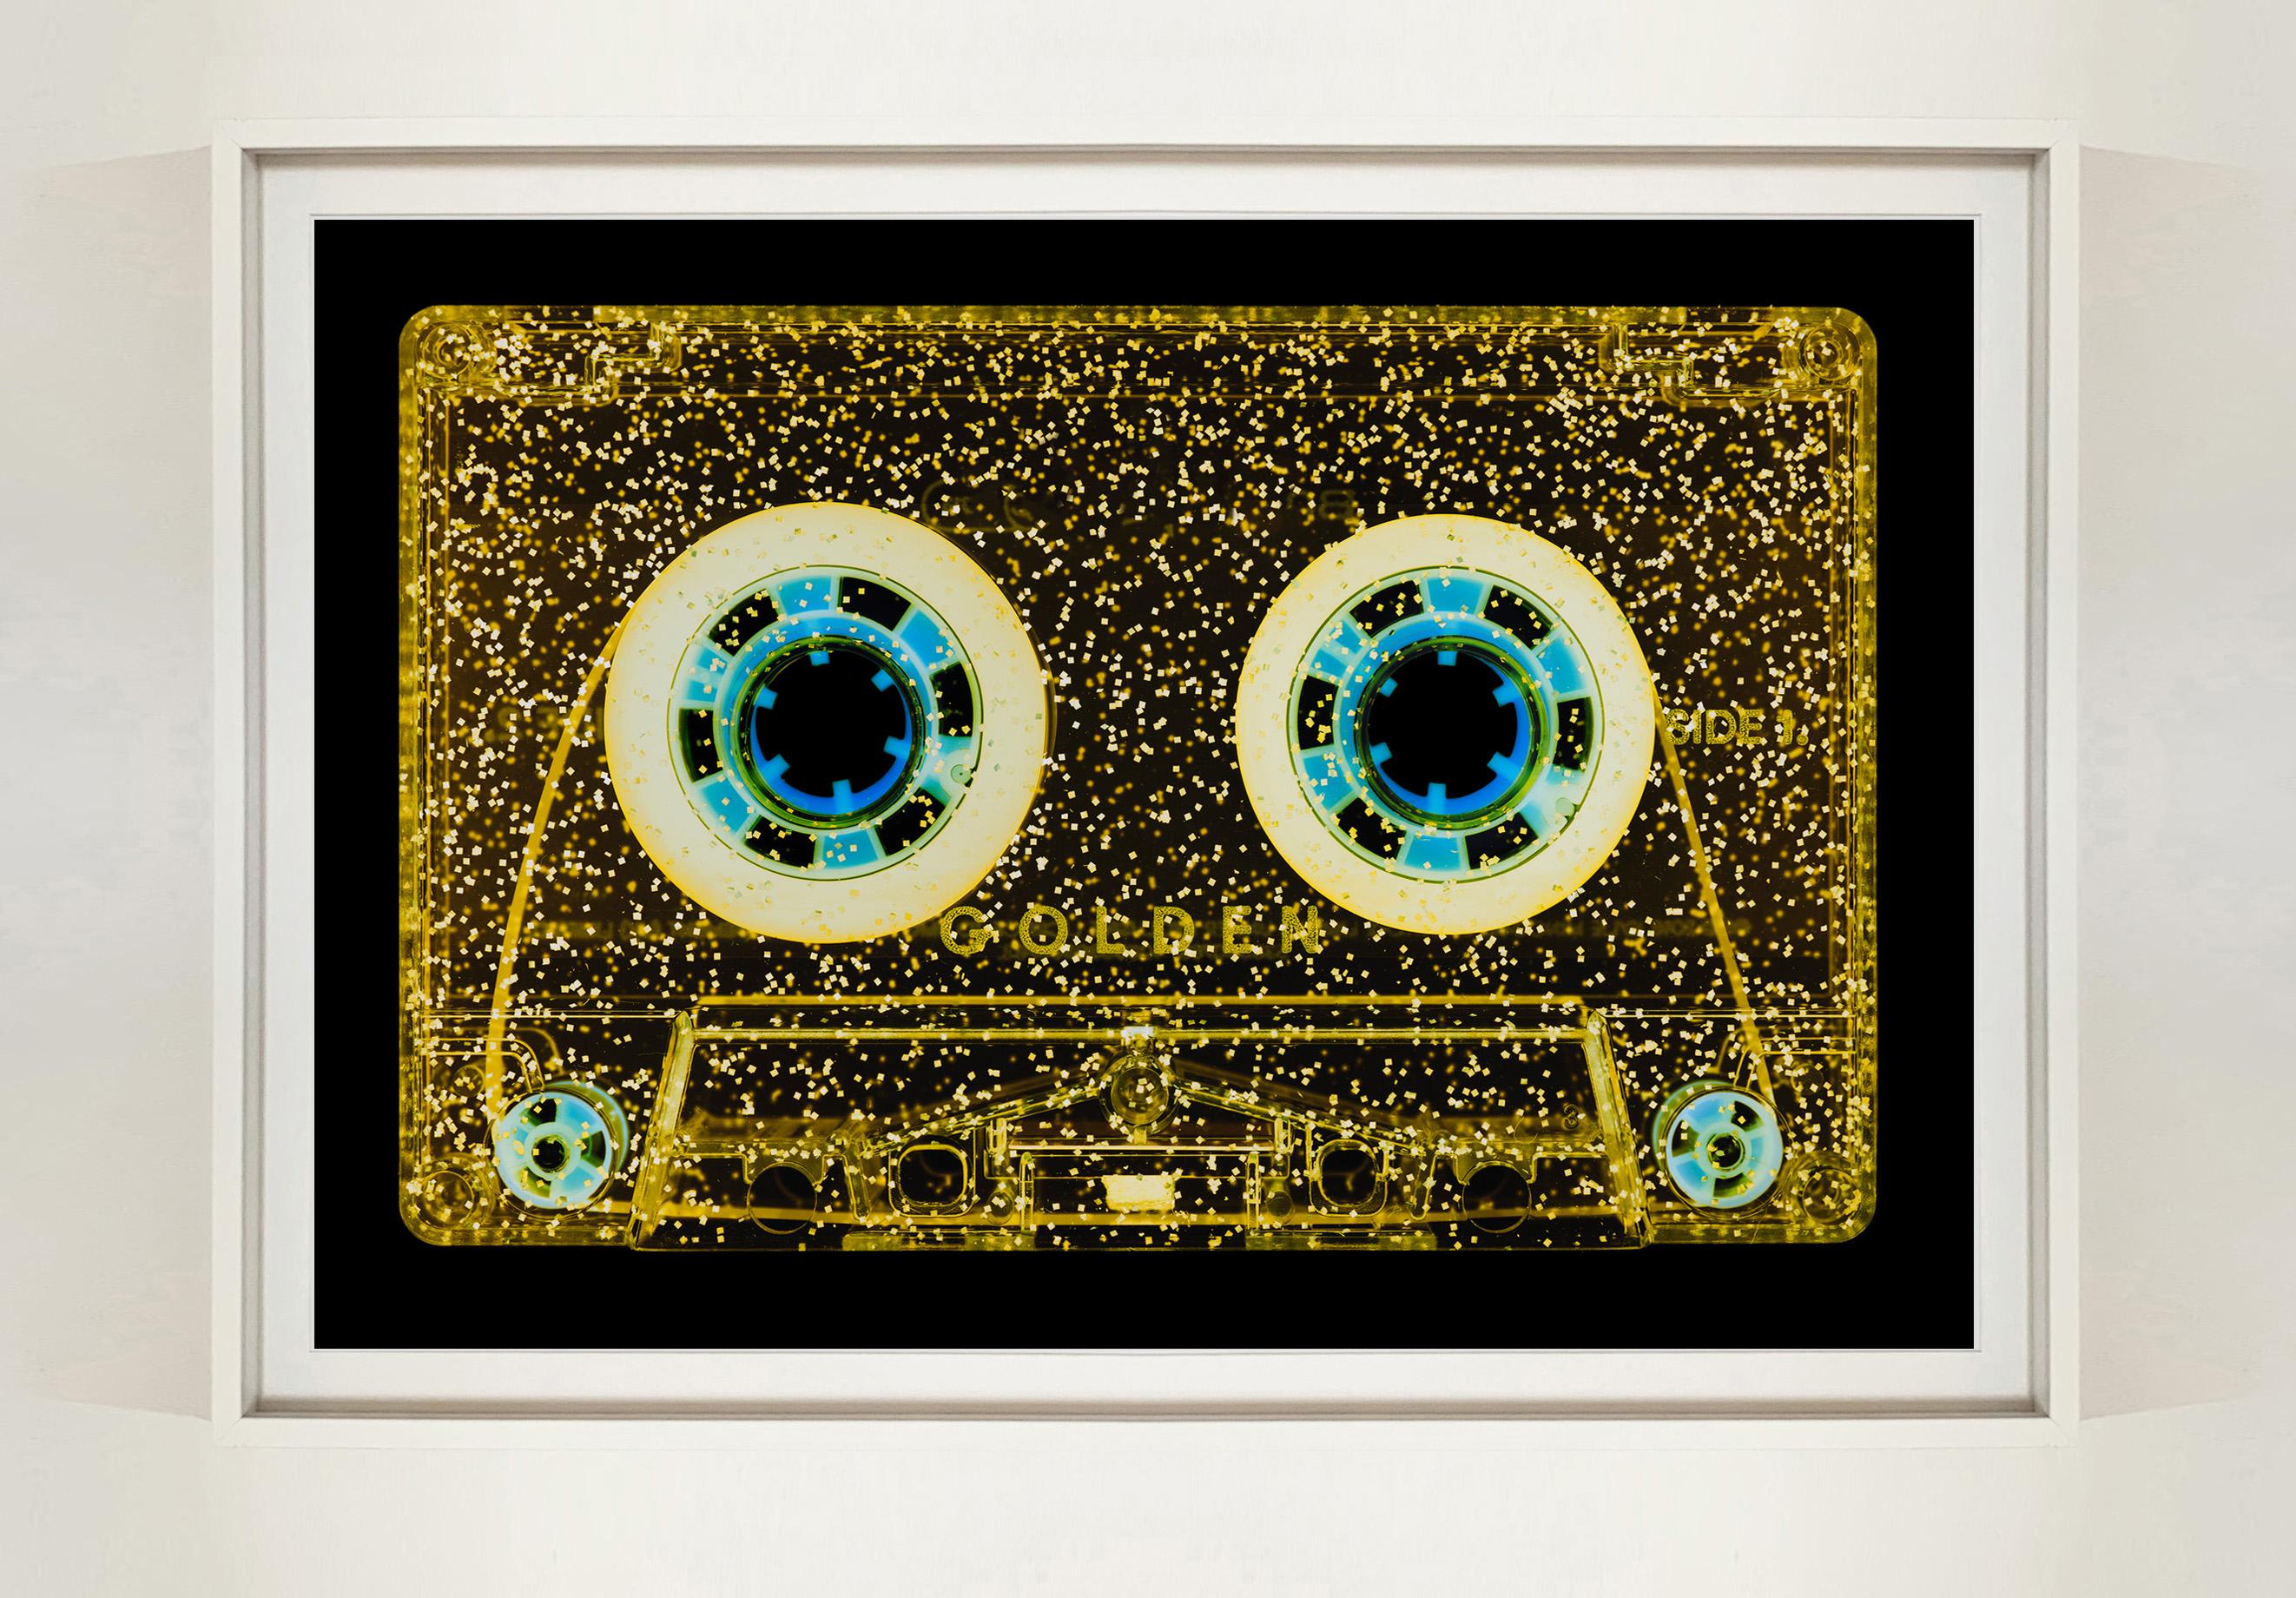 Tape Collection, All That Glitters is Golden - Pop Art Photography - Contemporary Print by Heidler & Heeps